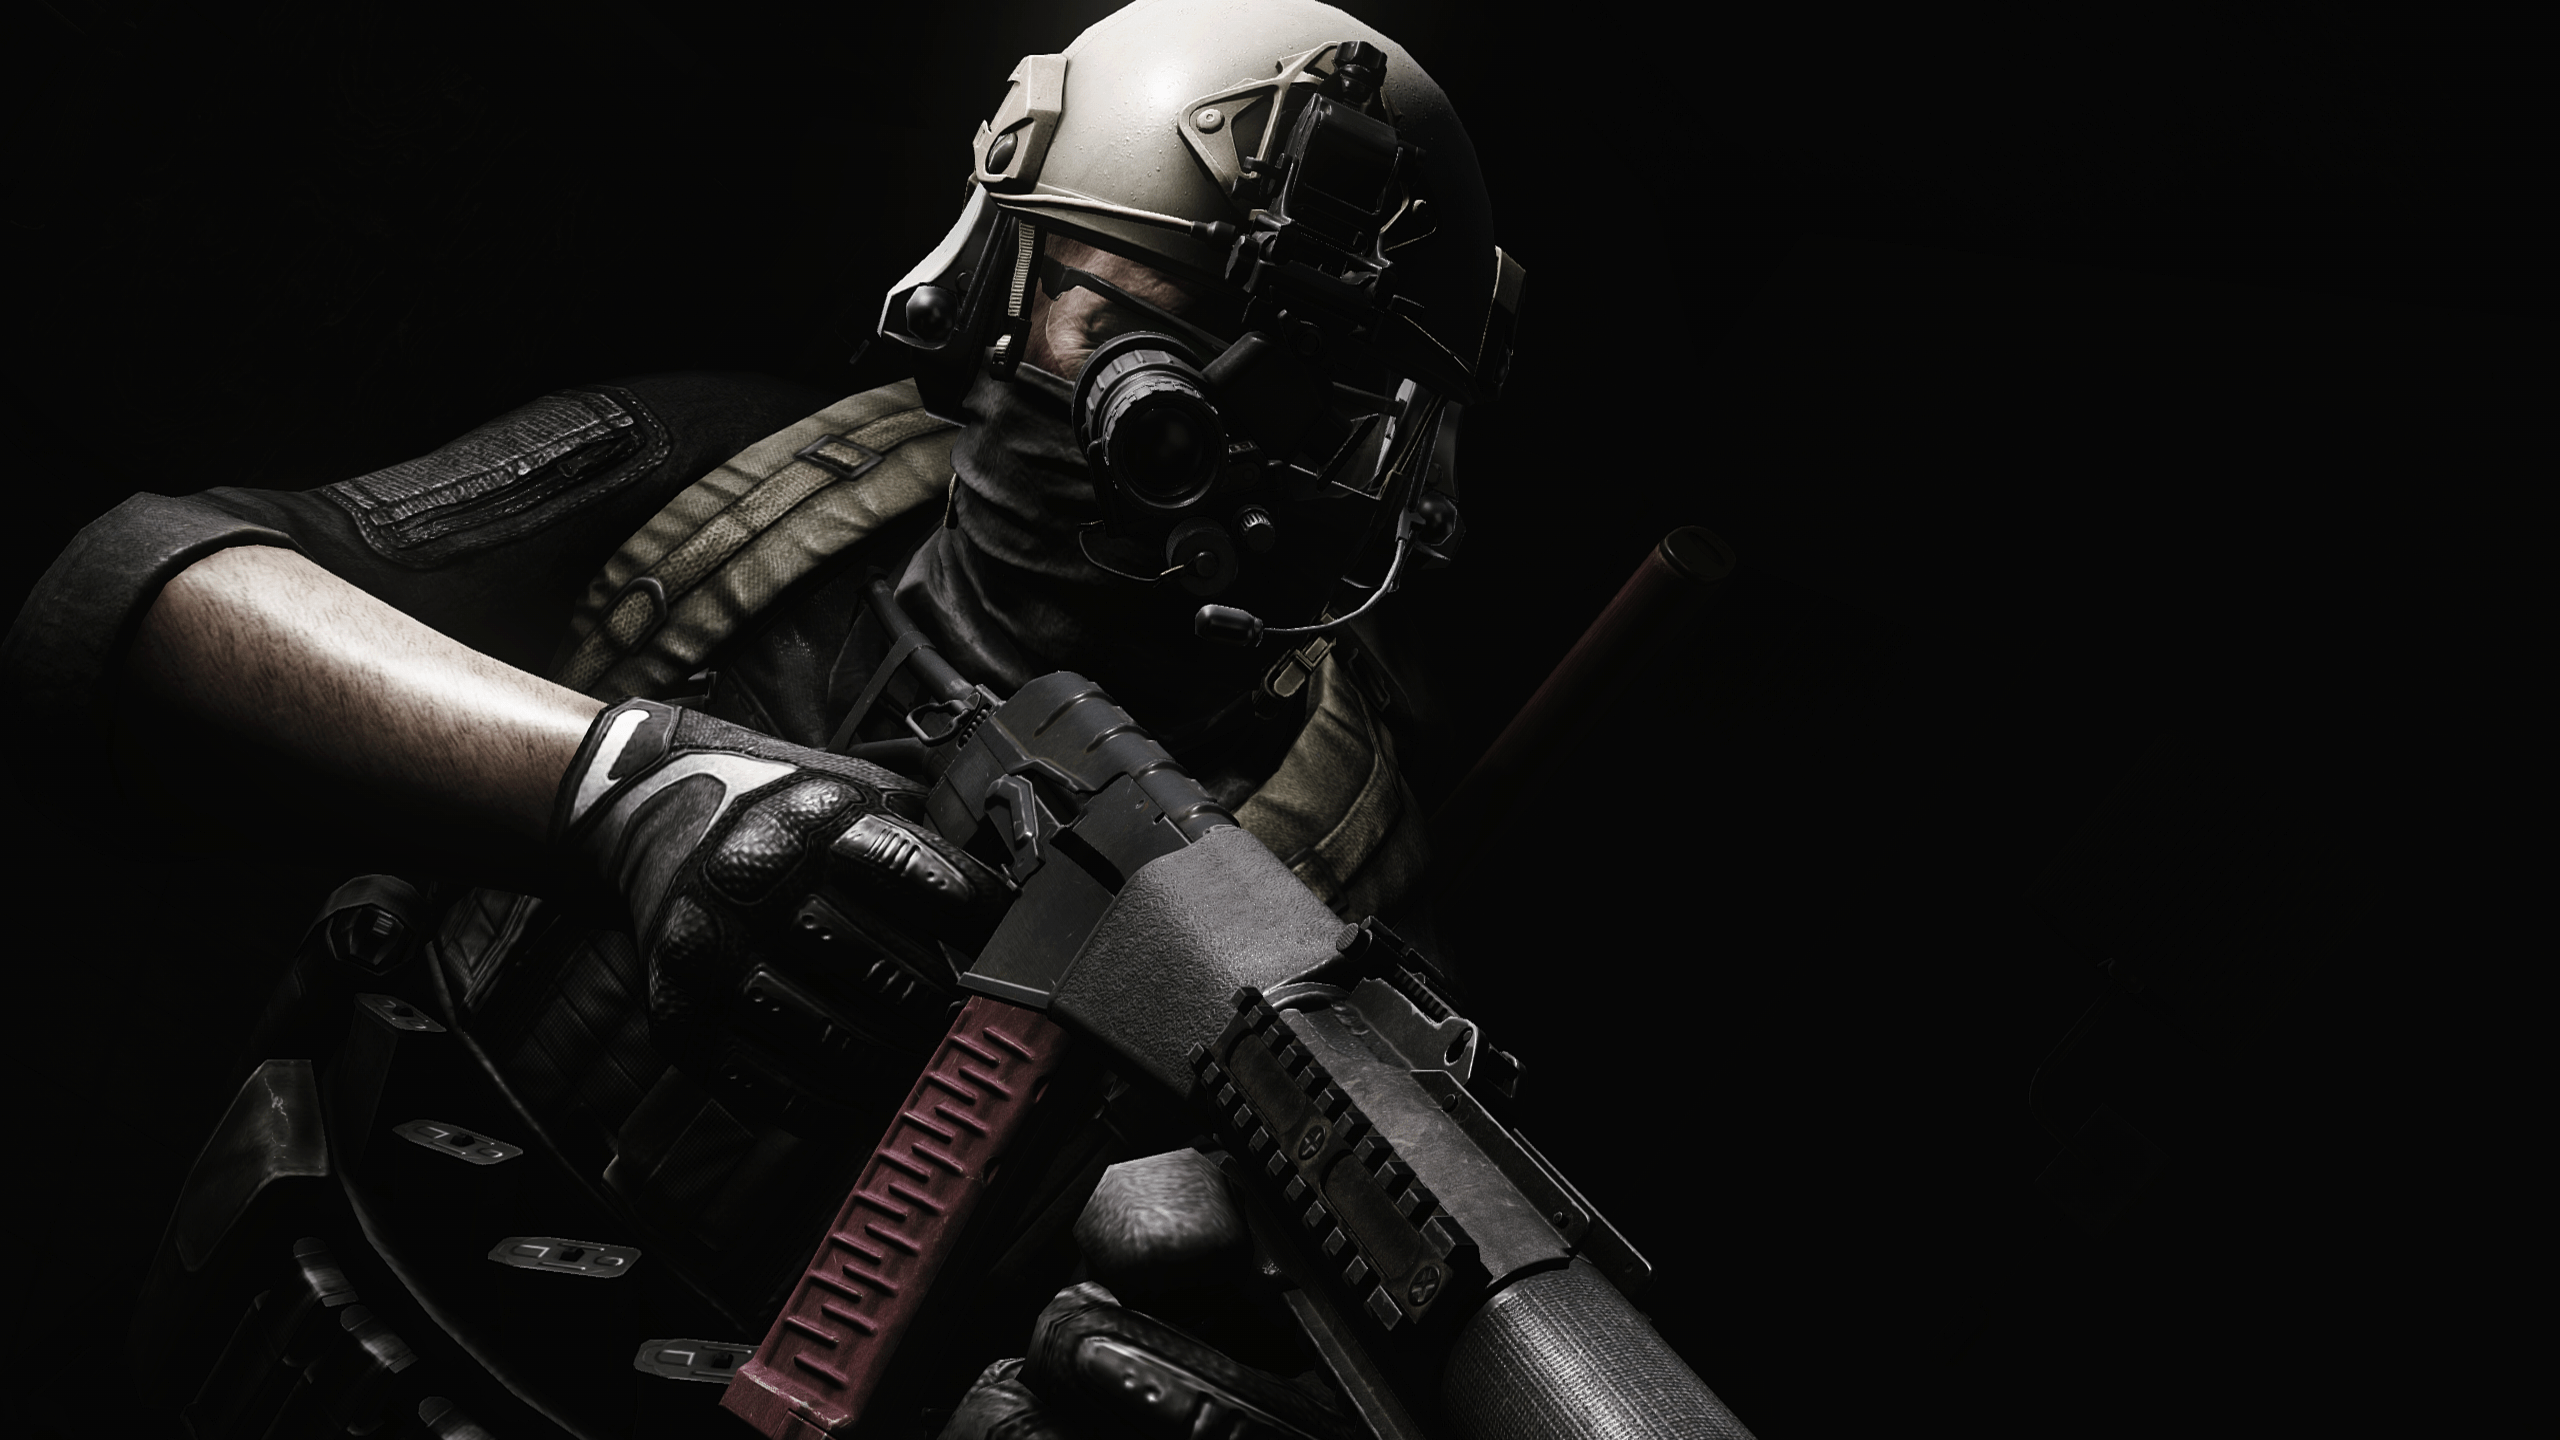 Download wallpaper Game, Avatar, Avatar, Cosplay, Play, Contract Wars, CW,  Escape from Tarkov, Personal avatar, EFT, HOPS, Hired Ops, R.2028, Author:  Bars10, section games in resolution 960x854